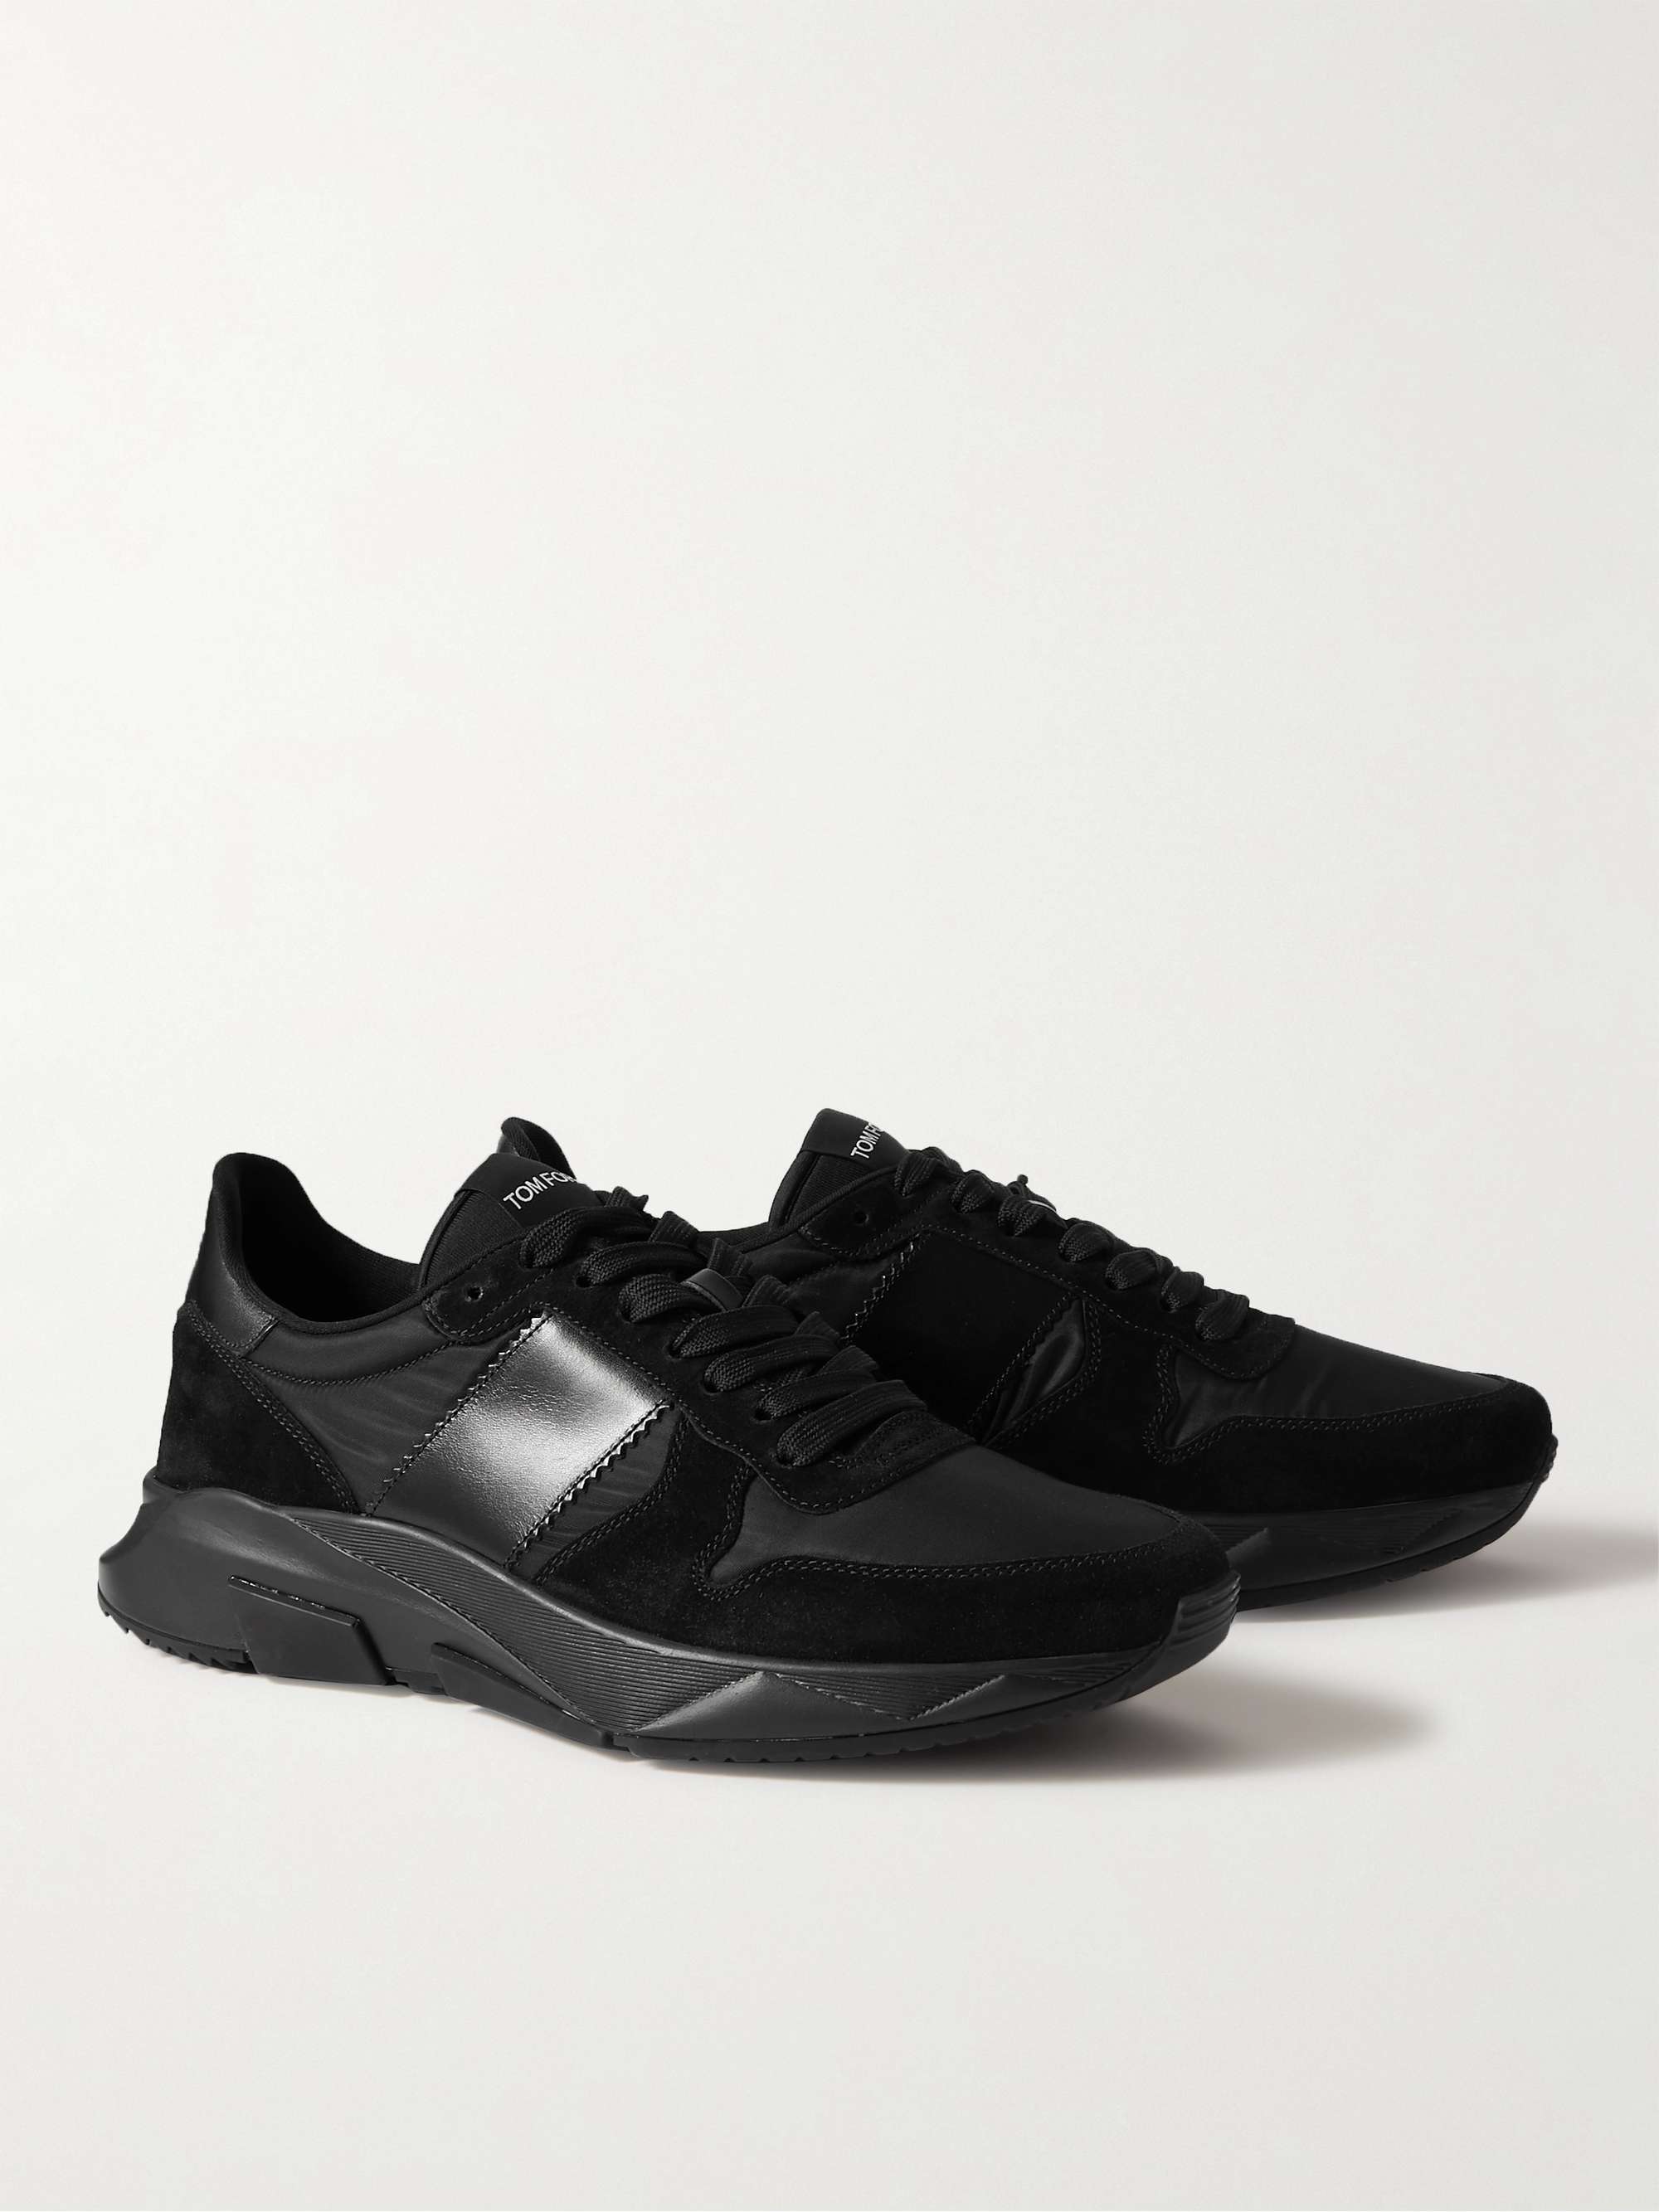 TOM FORD Jagga Leather-Trimmed Nylon and Suede Sneakers